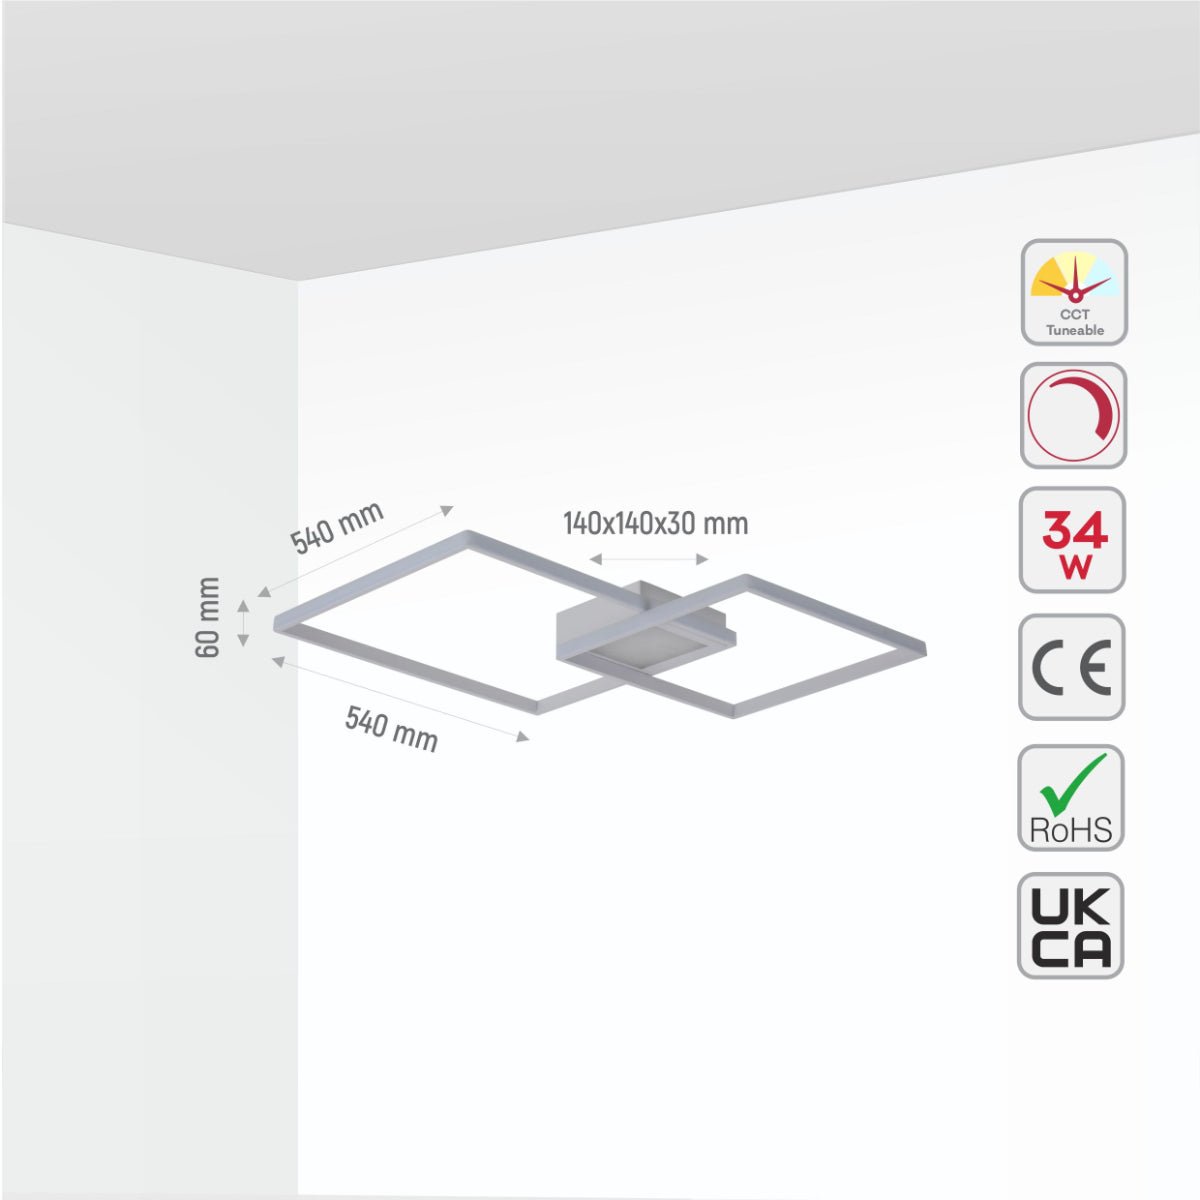 Size and specs of LED Crossing Squares White Finishing 34W CCT Change Dimmable Contemporary Nordic Scandinavian Flush Ceiling Light with Remote Control | TEKLED 154-17264